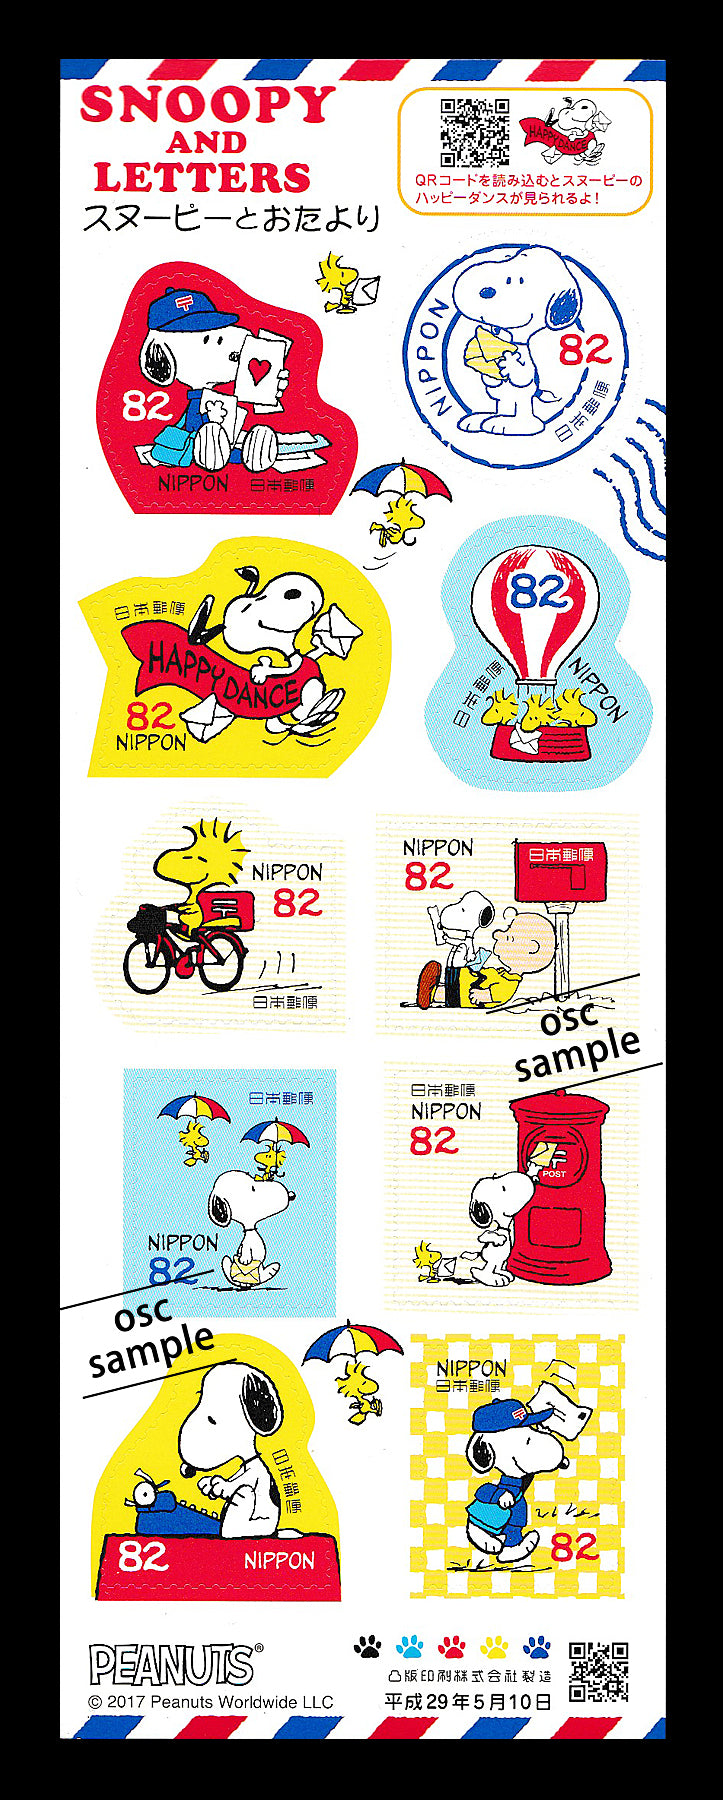 Snoopy and Letters